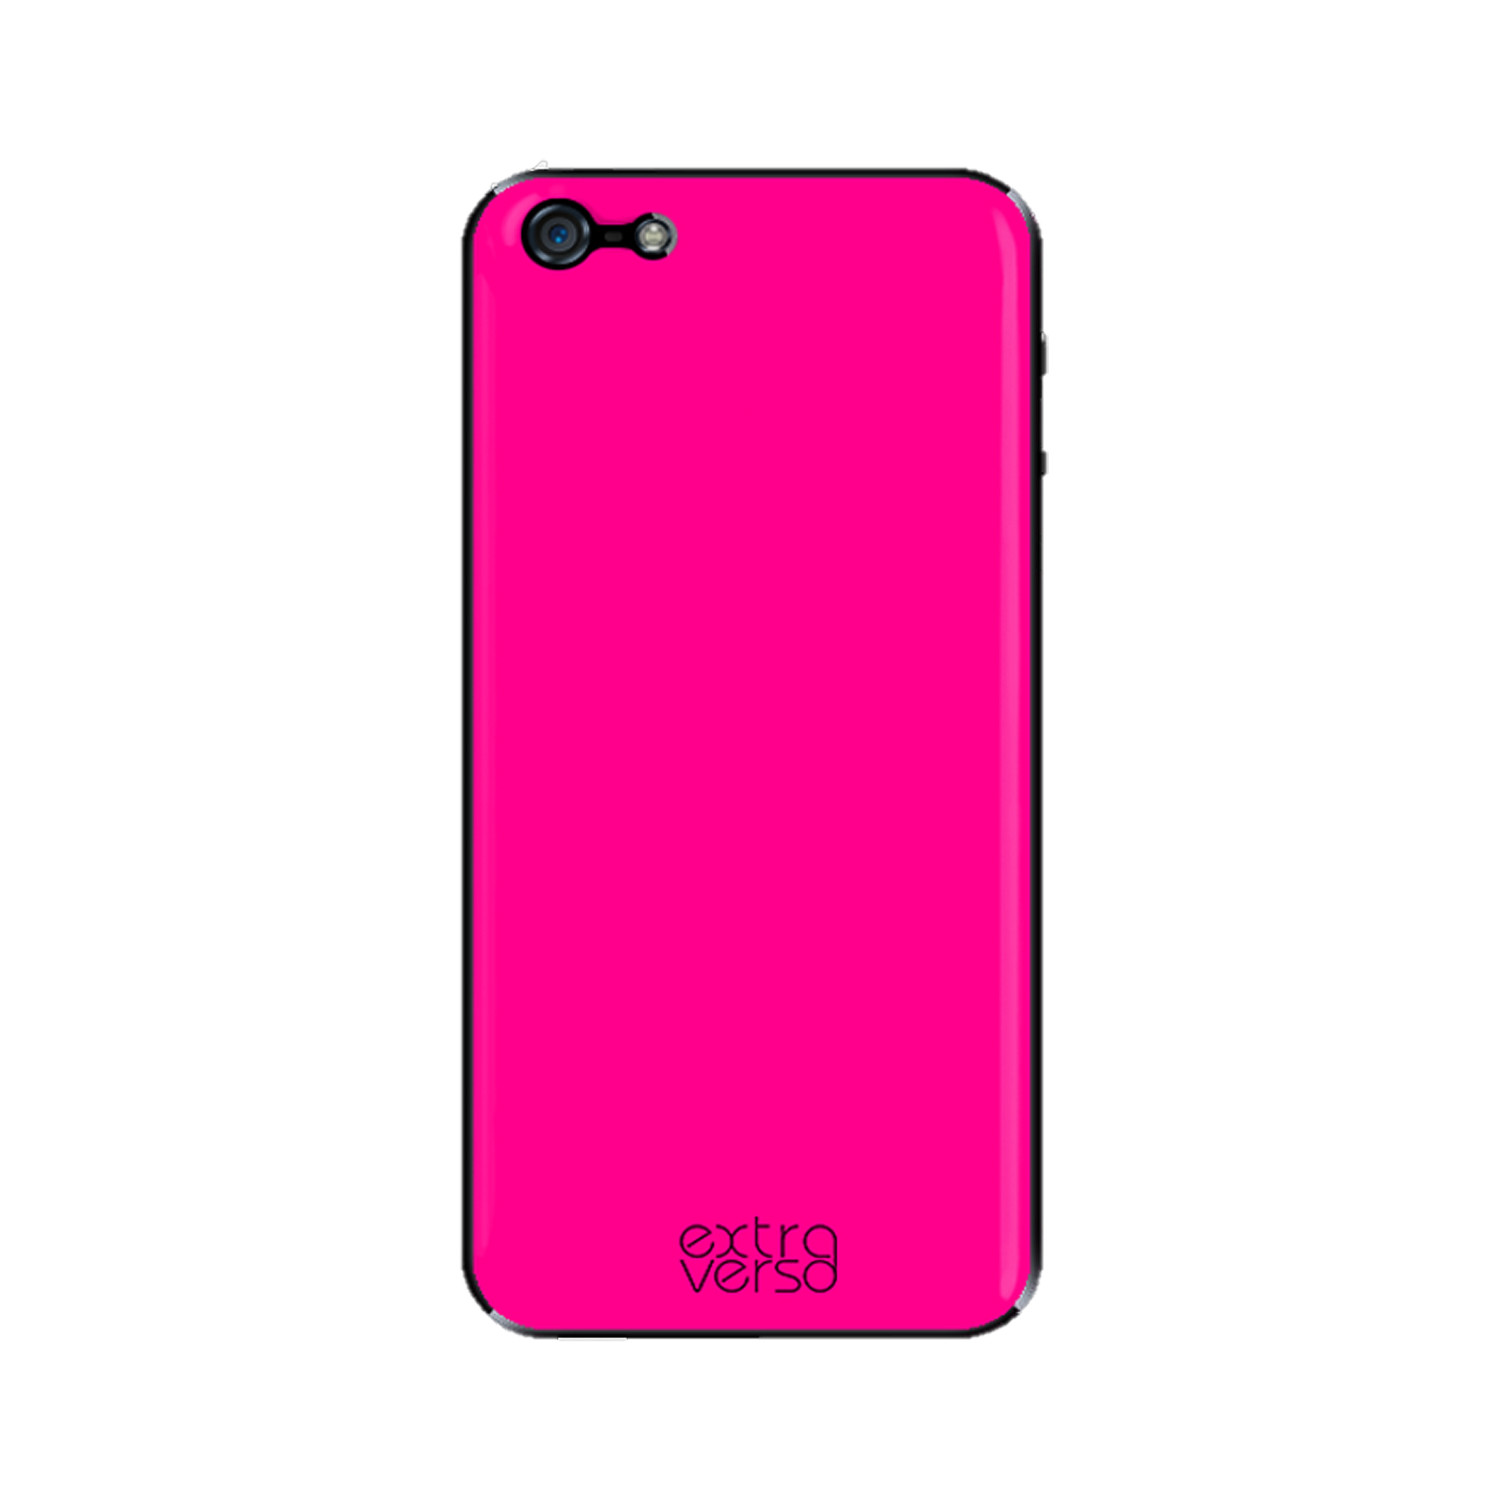 iPhone Case // Fluo Pink (iPhone 4/4s) - Extra Verso - Touch of Modern